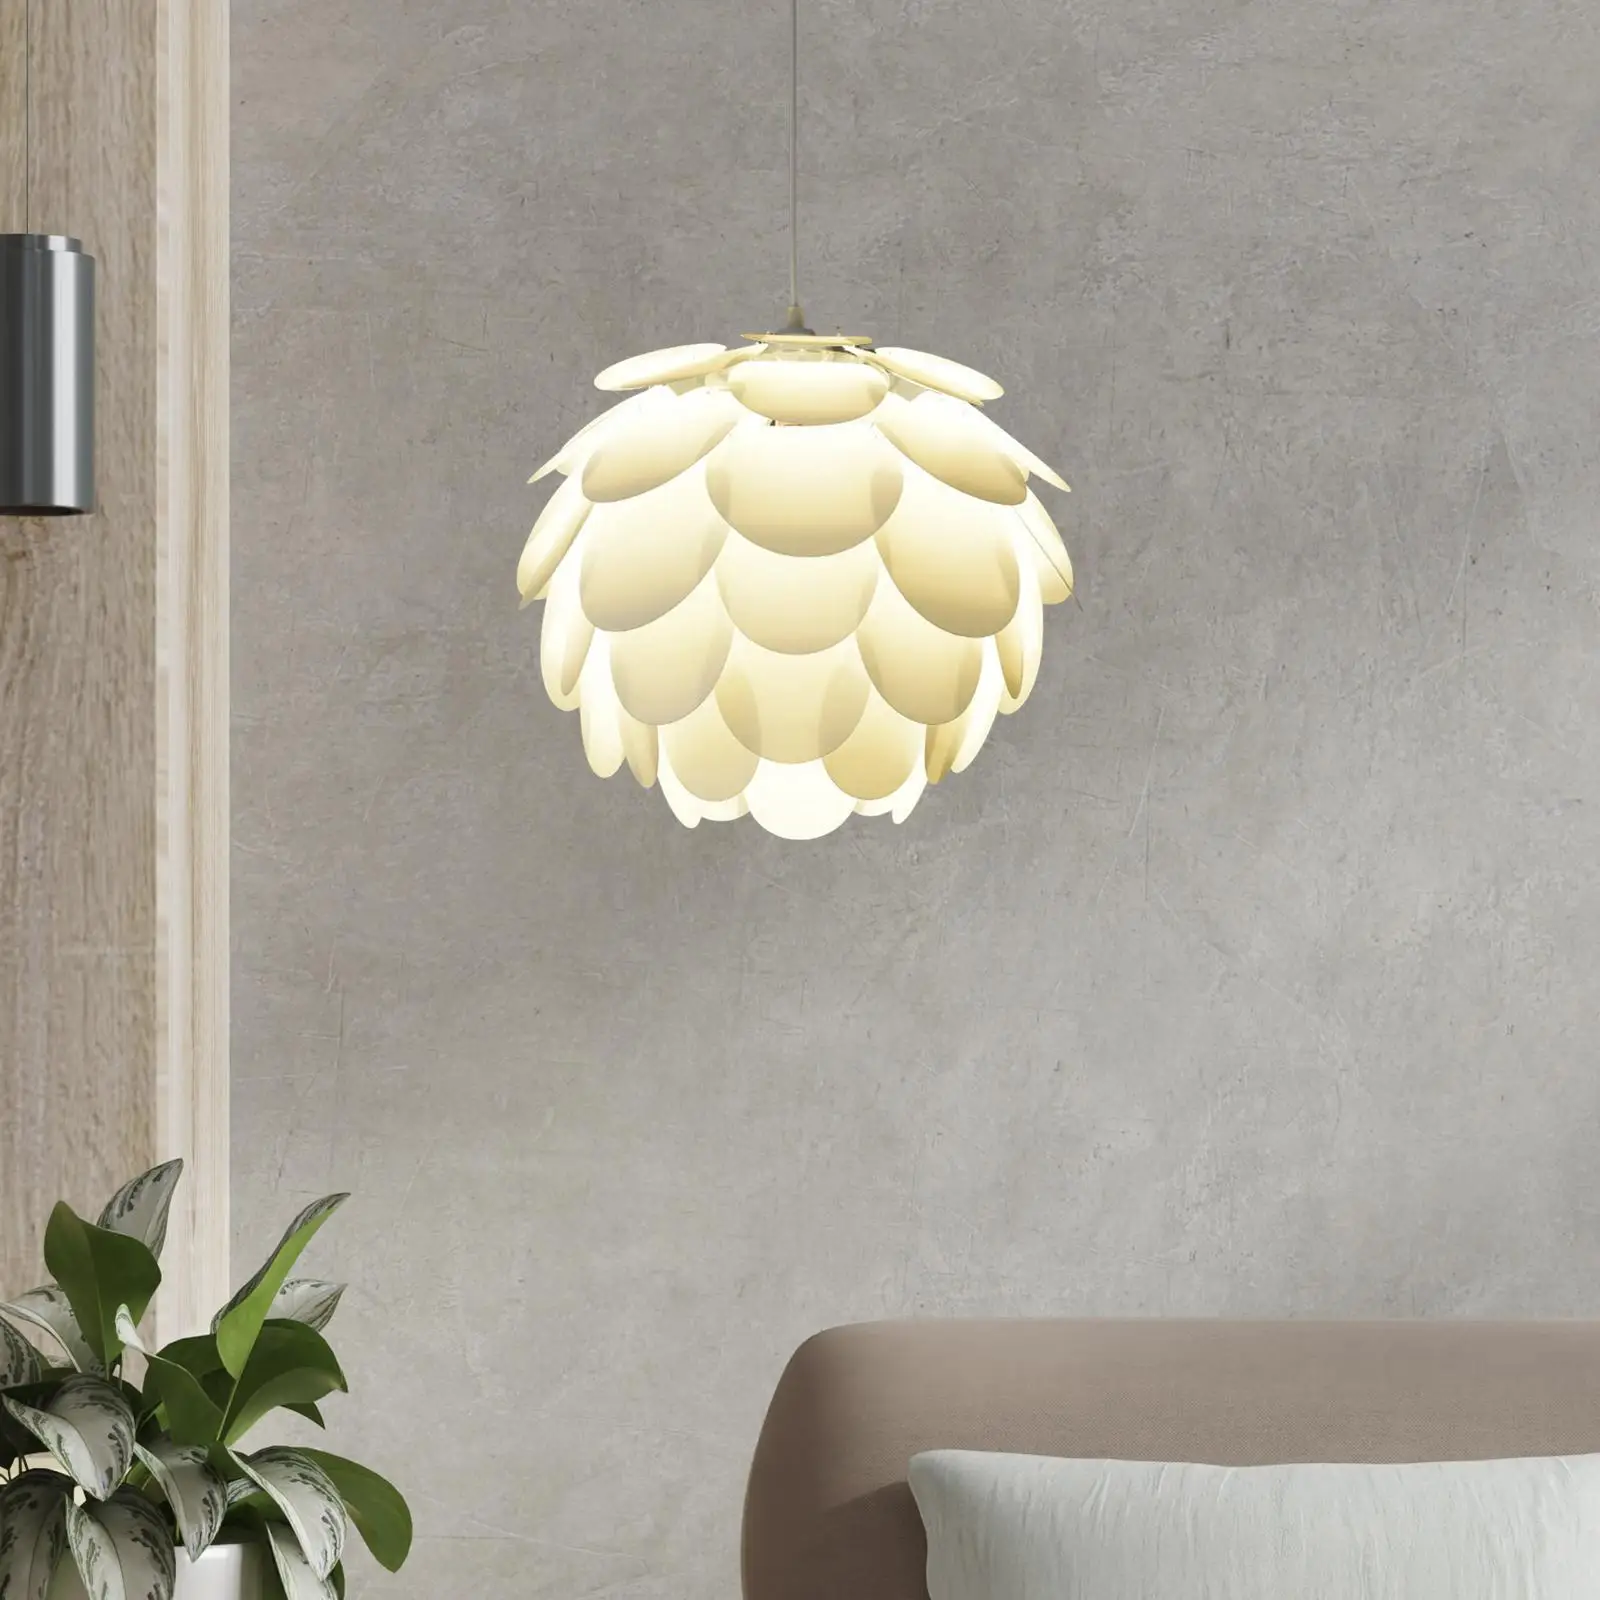 Pendant Lamp Shade Light Fixture Cover Ceiling Light Shade Chandelier for Hotel Kitchen Island Balcony Home Bar Cafe Decor